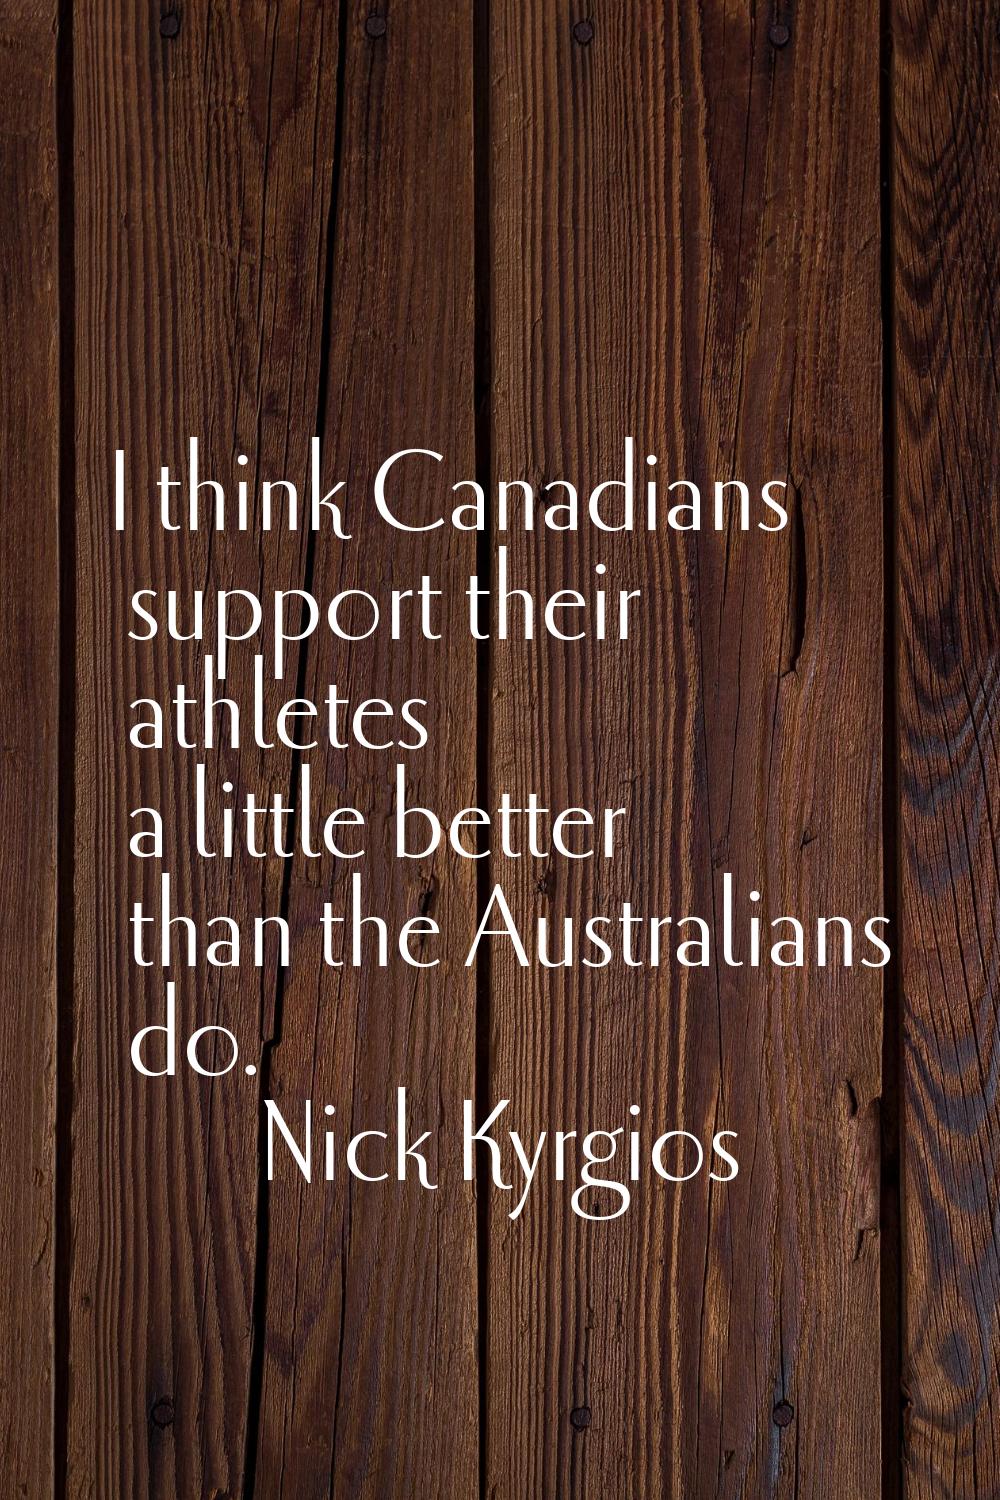 I think Canadians support their athletes a little better than the Australians do.